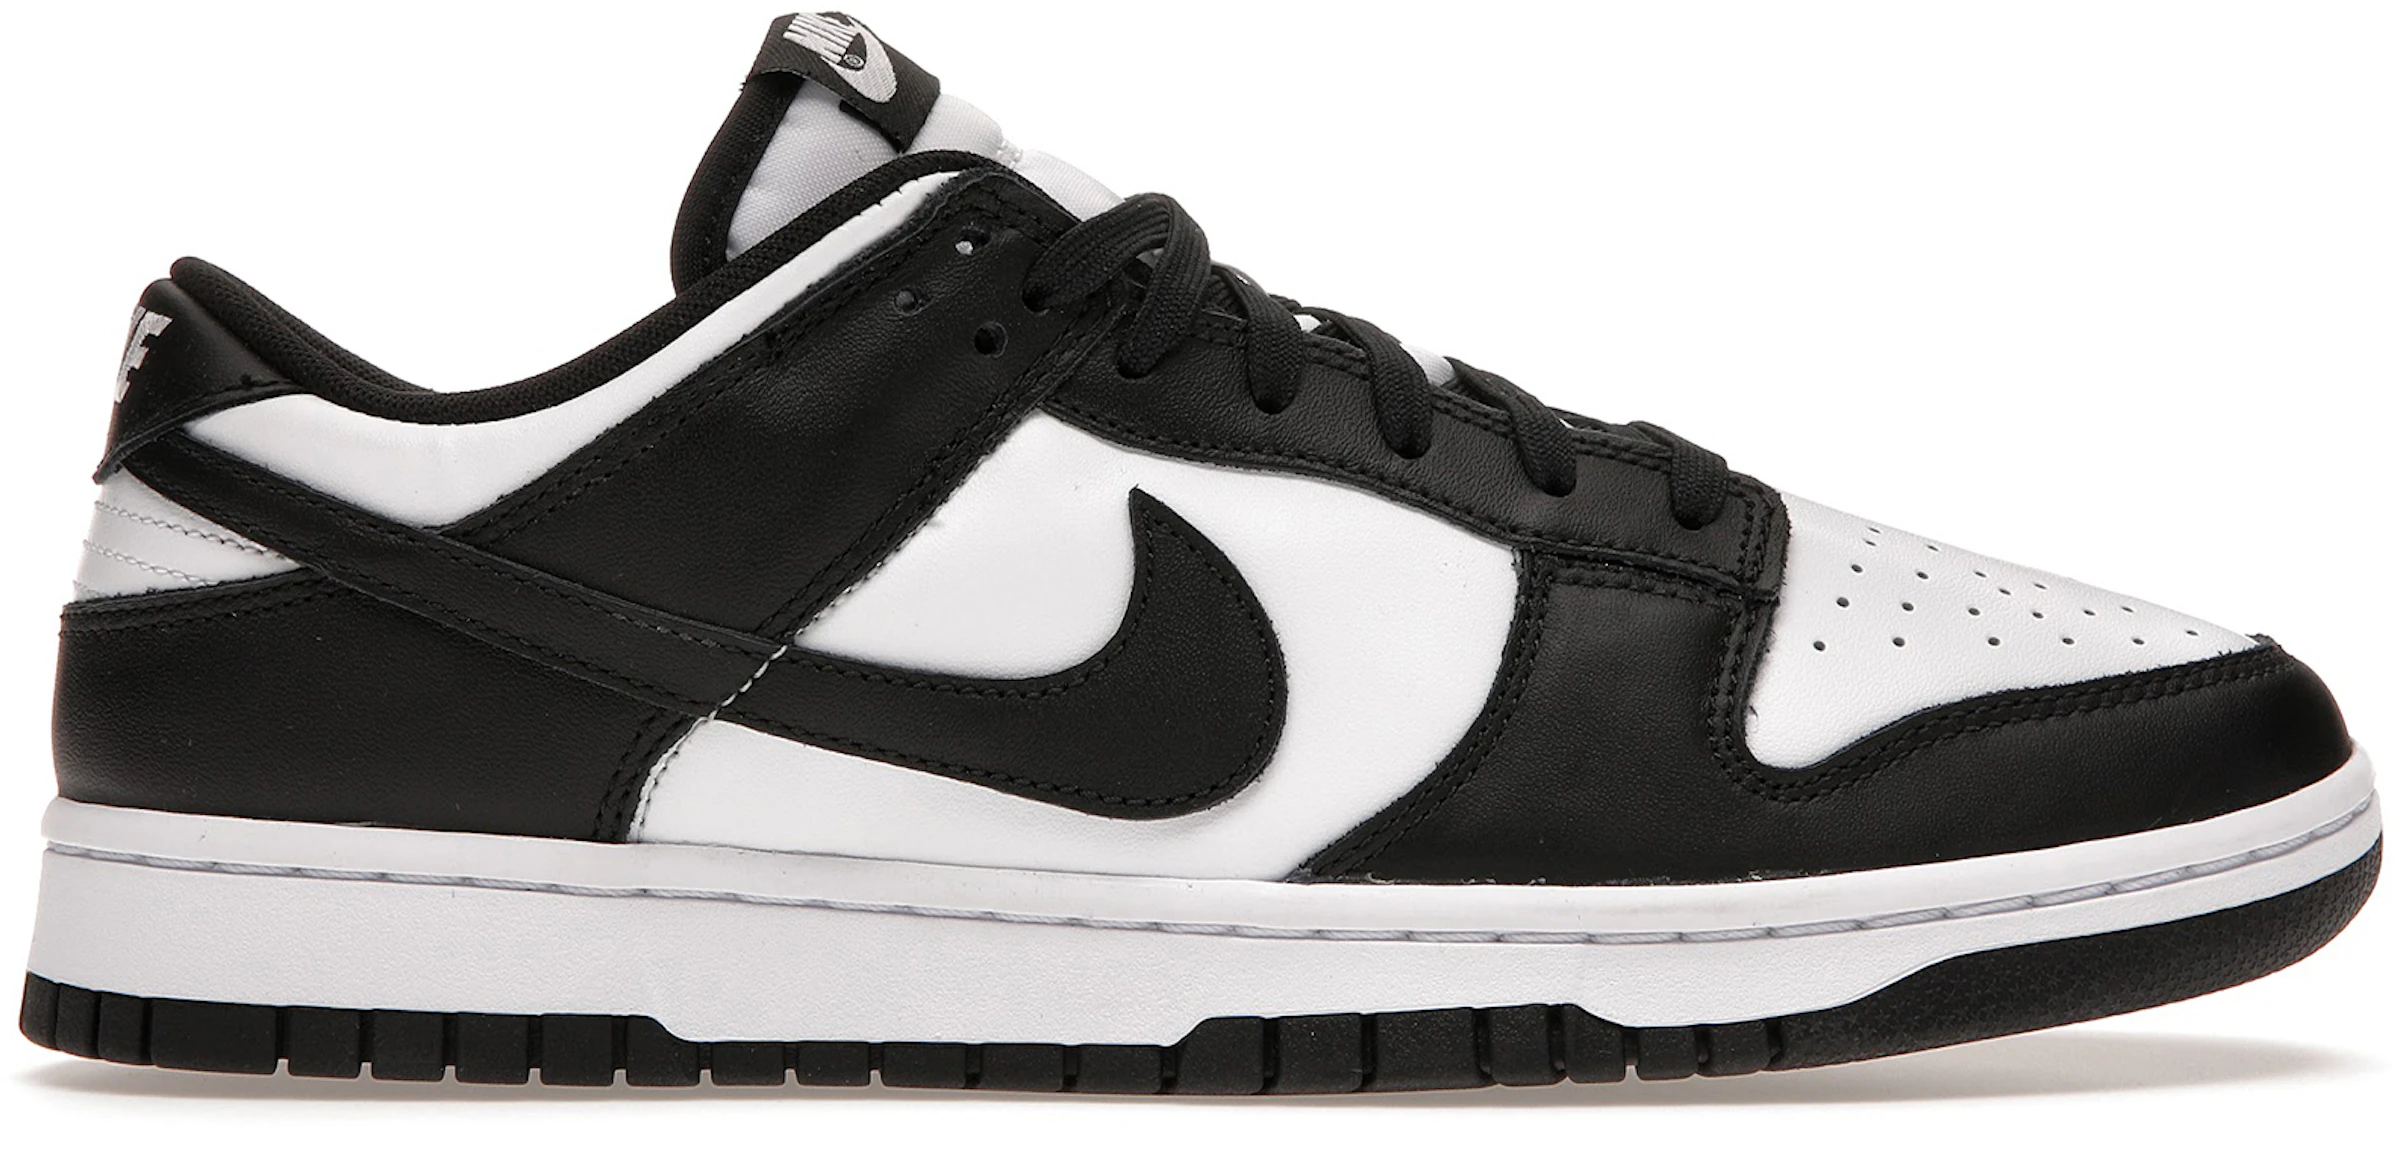 Nike Dunk Low Retro Black White Vs Panda Get To Know Which Is Right